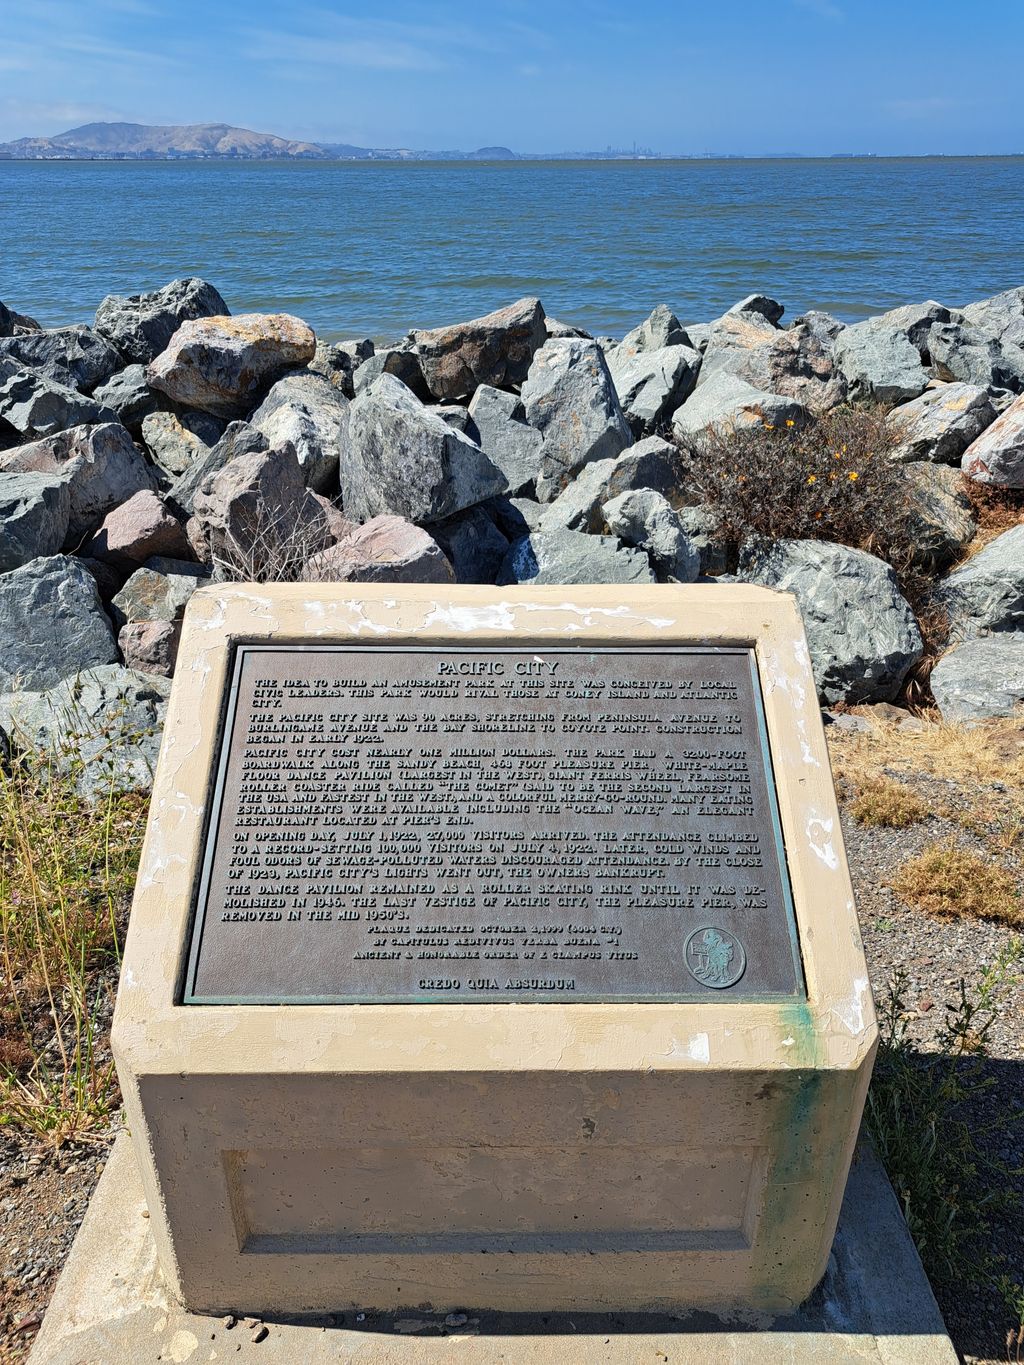 Historical Marker: Pacific City